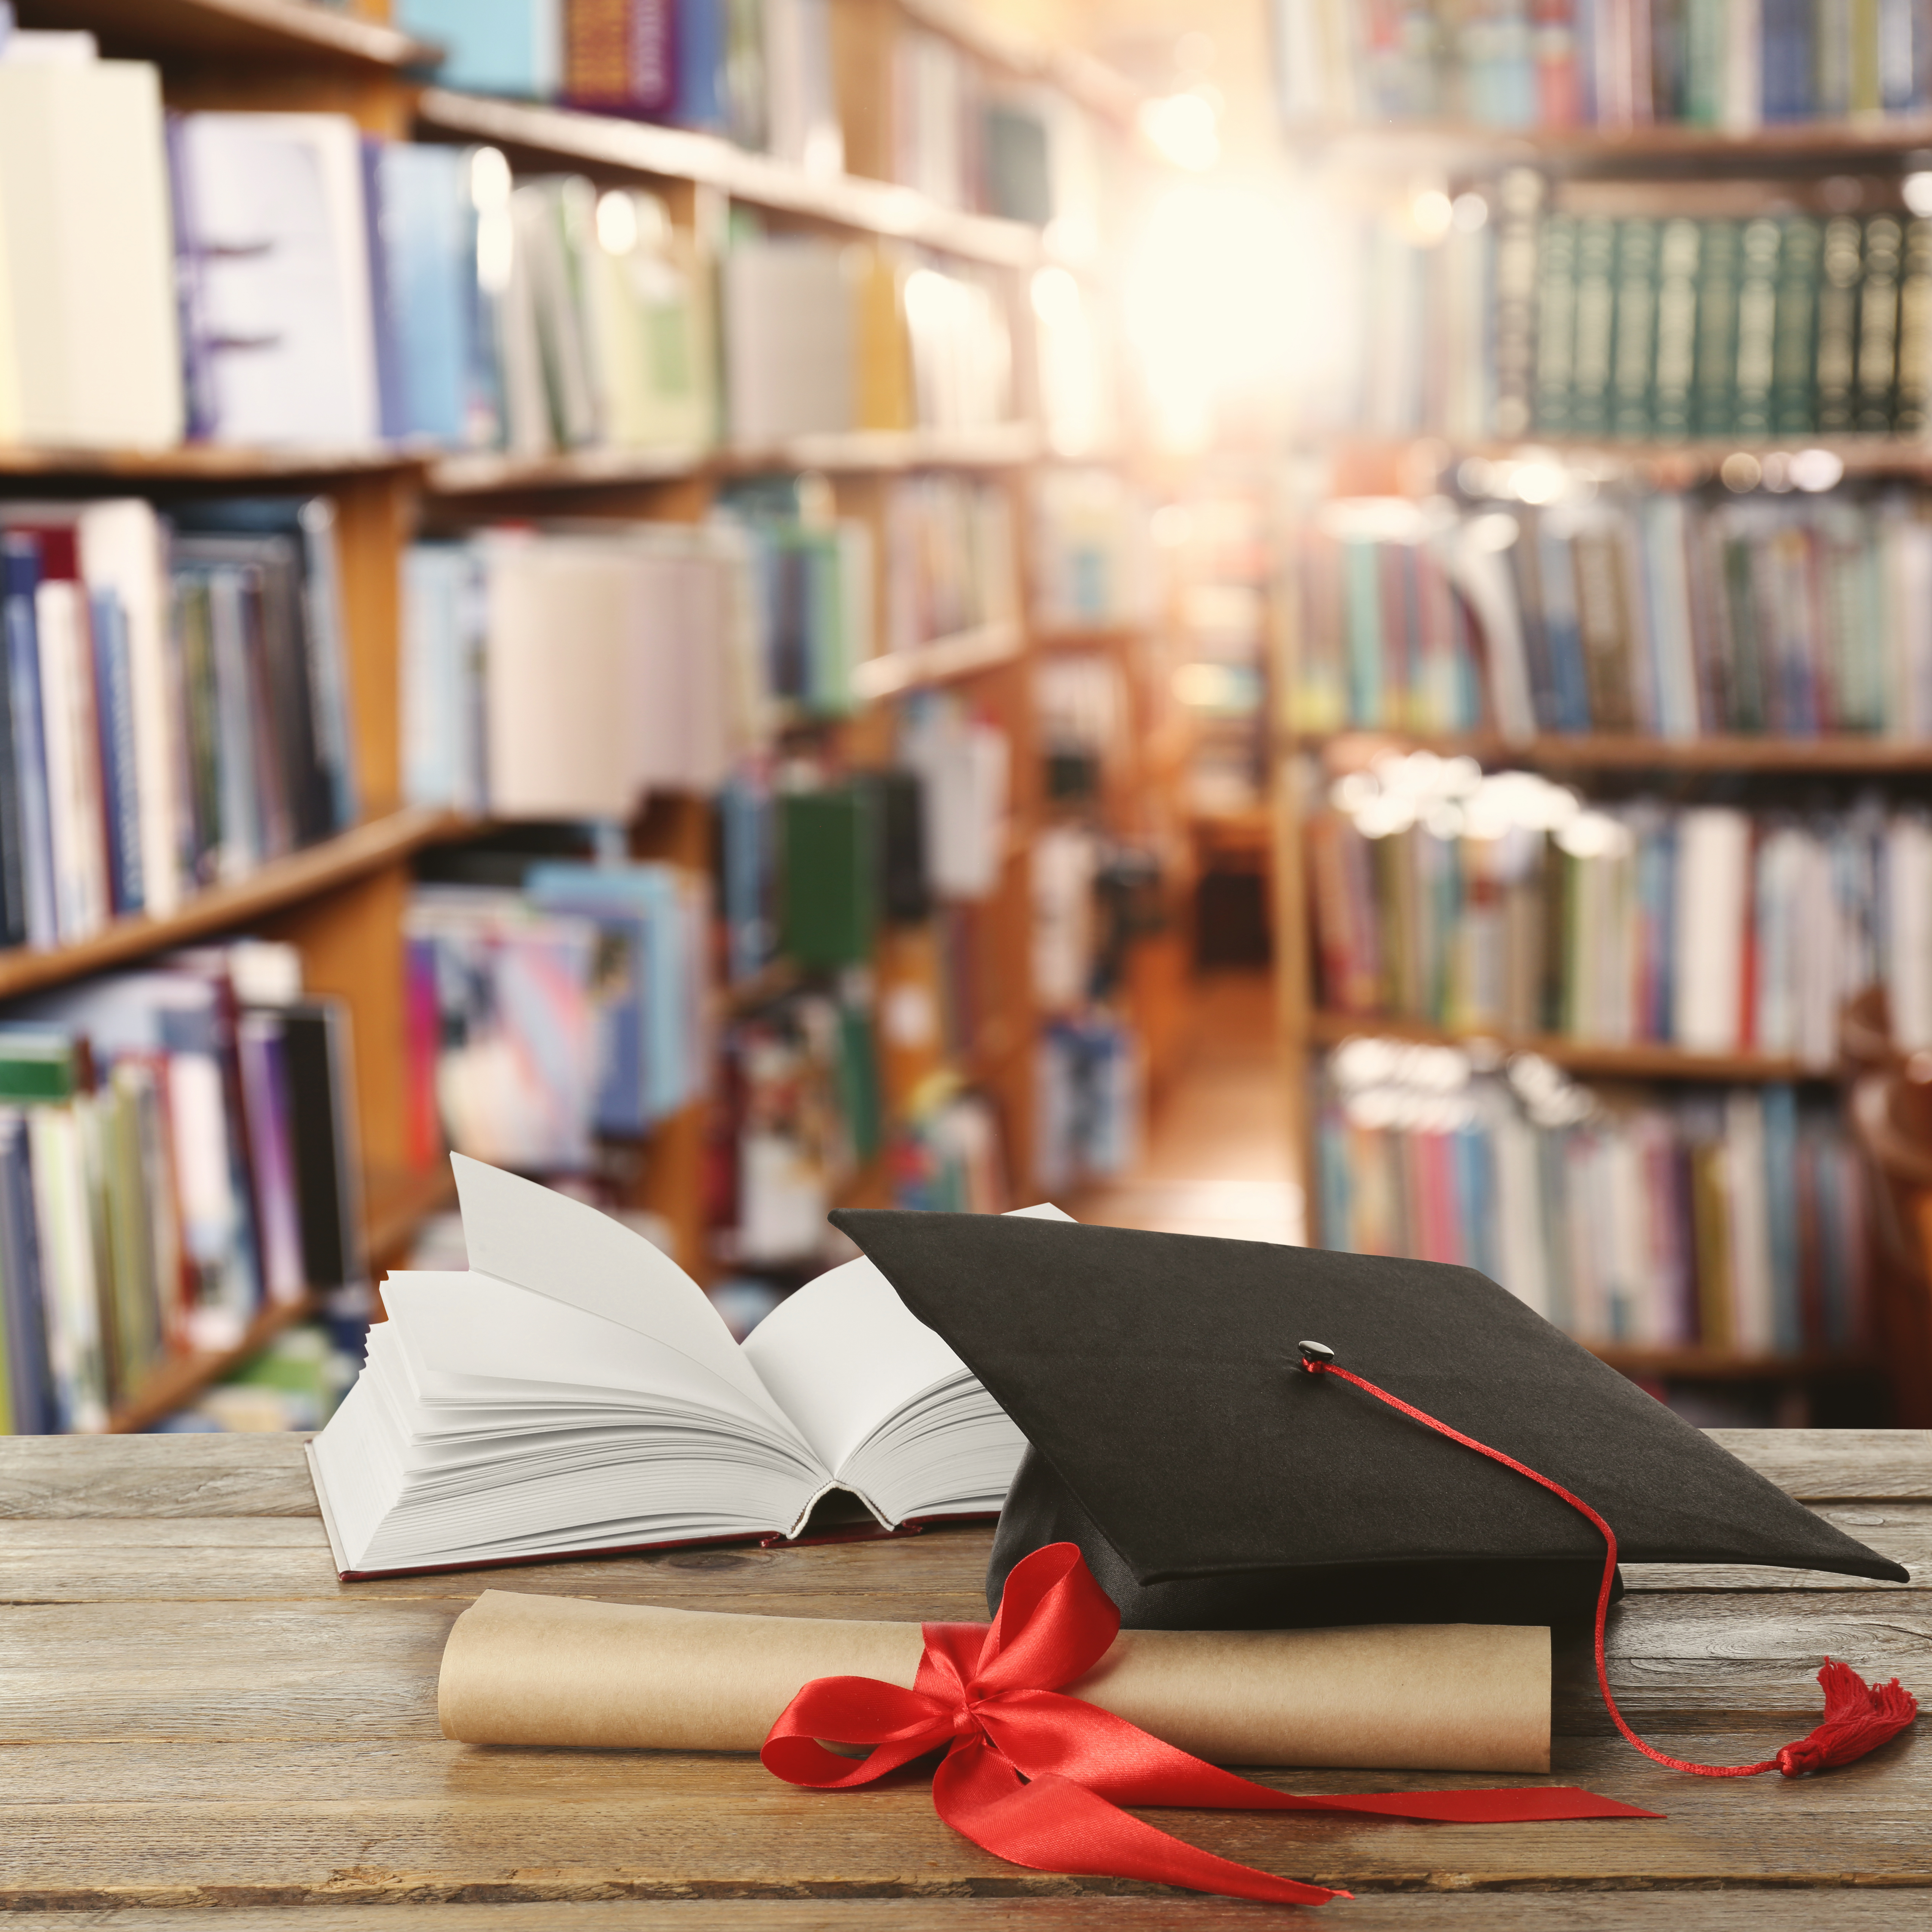 Open book, grad cap, and diploma on a table in a library